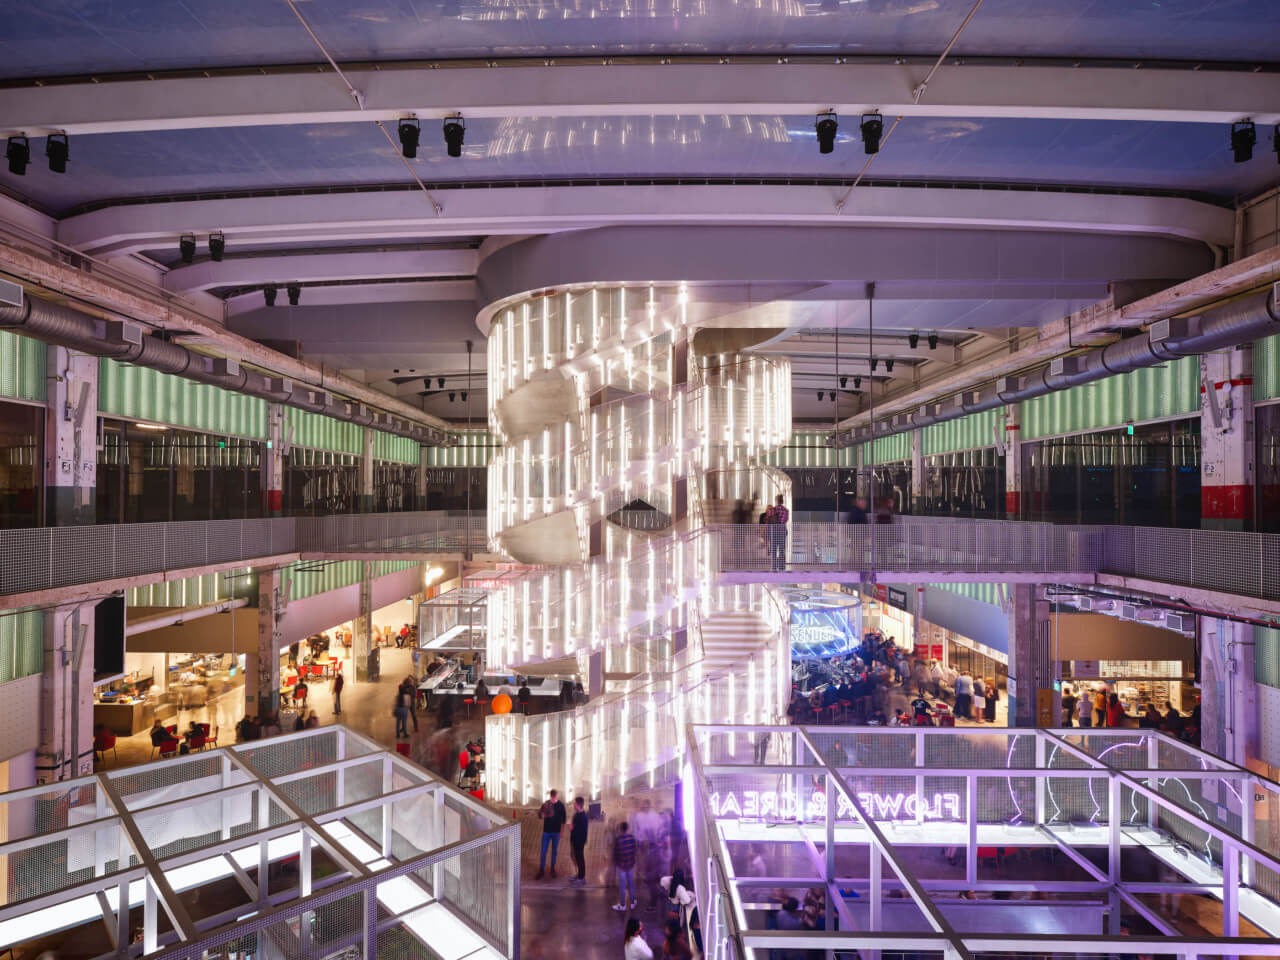 a bustling public atrium illuminated in purple hues with a spiraling staircase at its center